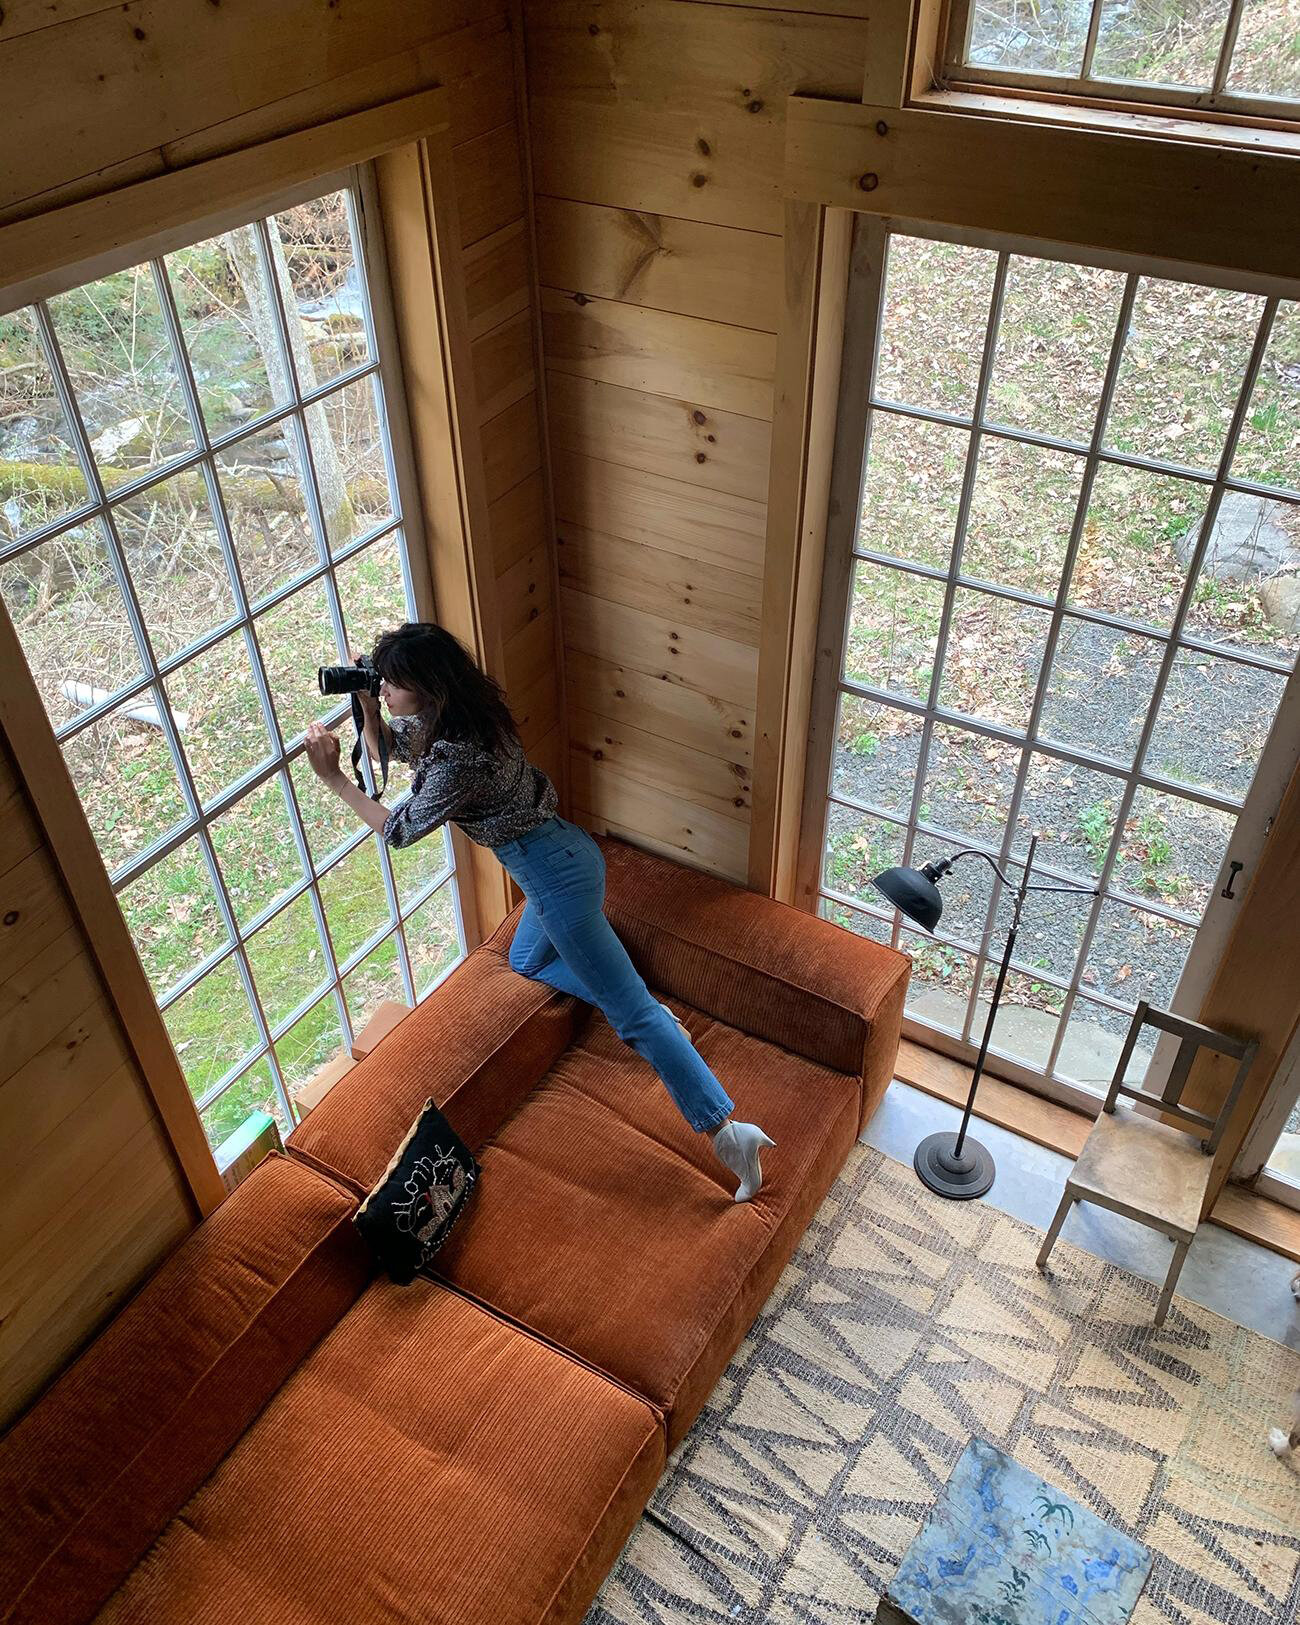 Helena Christensen In Catskills For Sunday Times Style May 31 2020